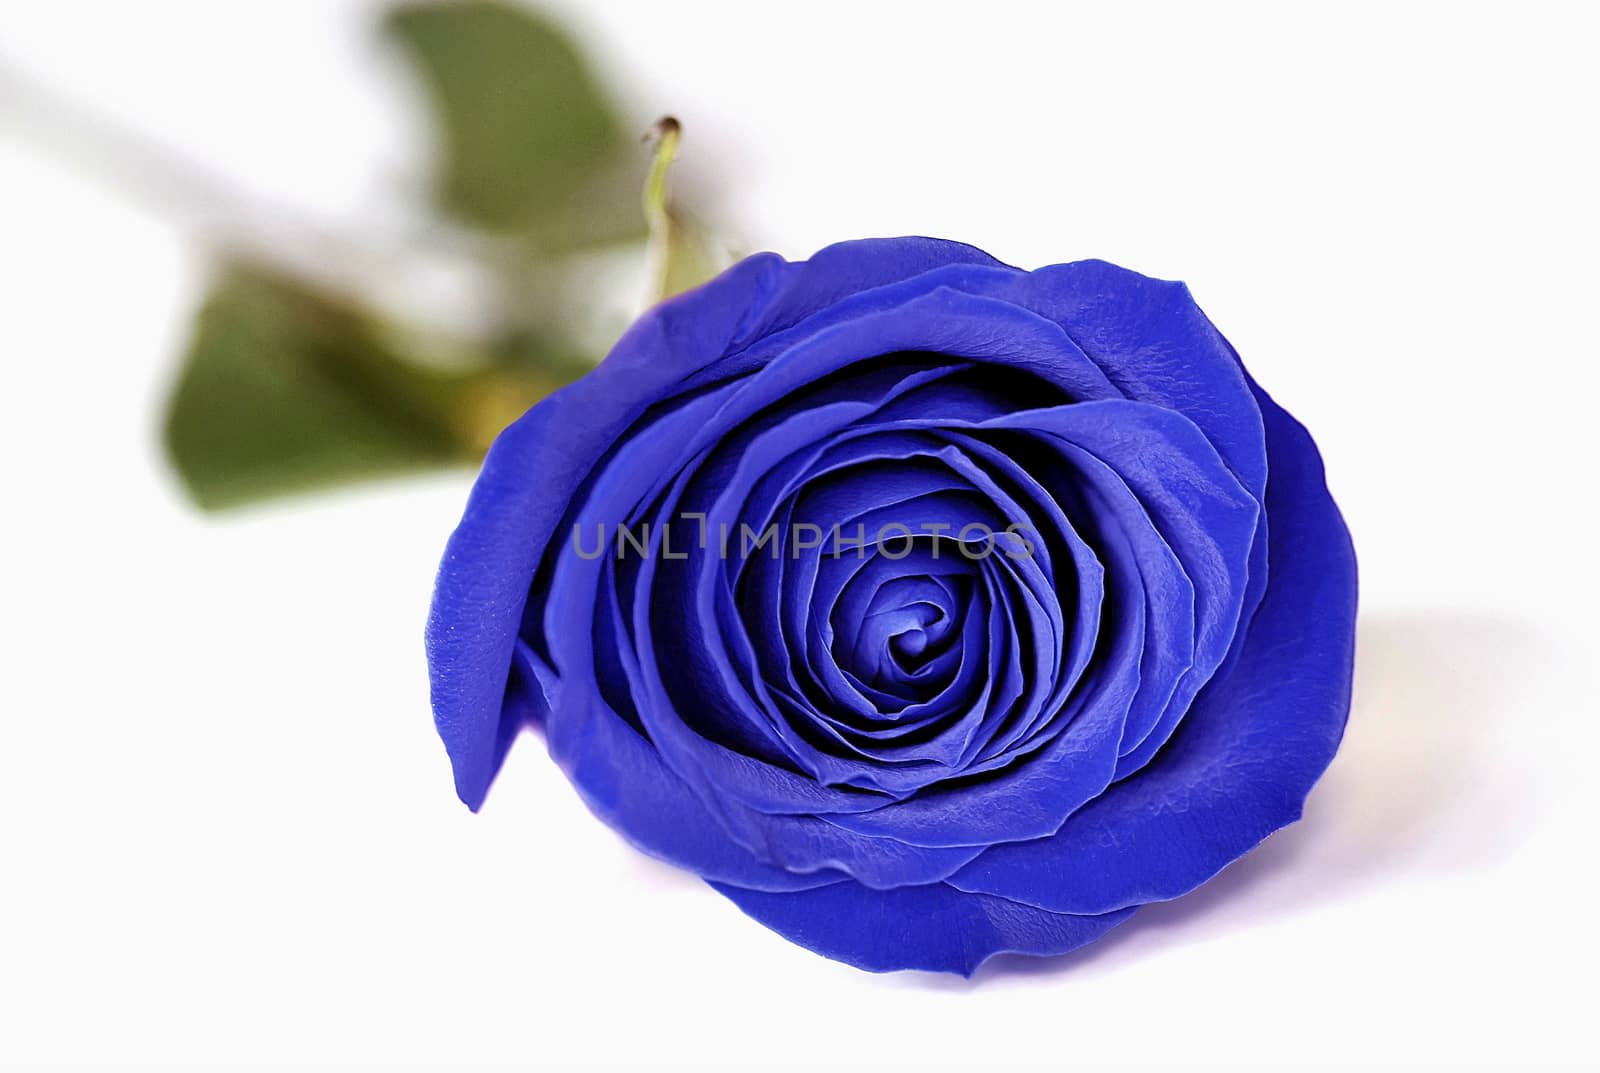 A blue rose with green leaves on a white background.